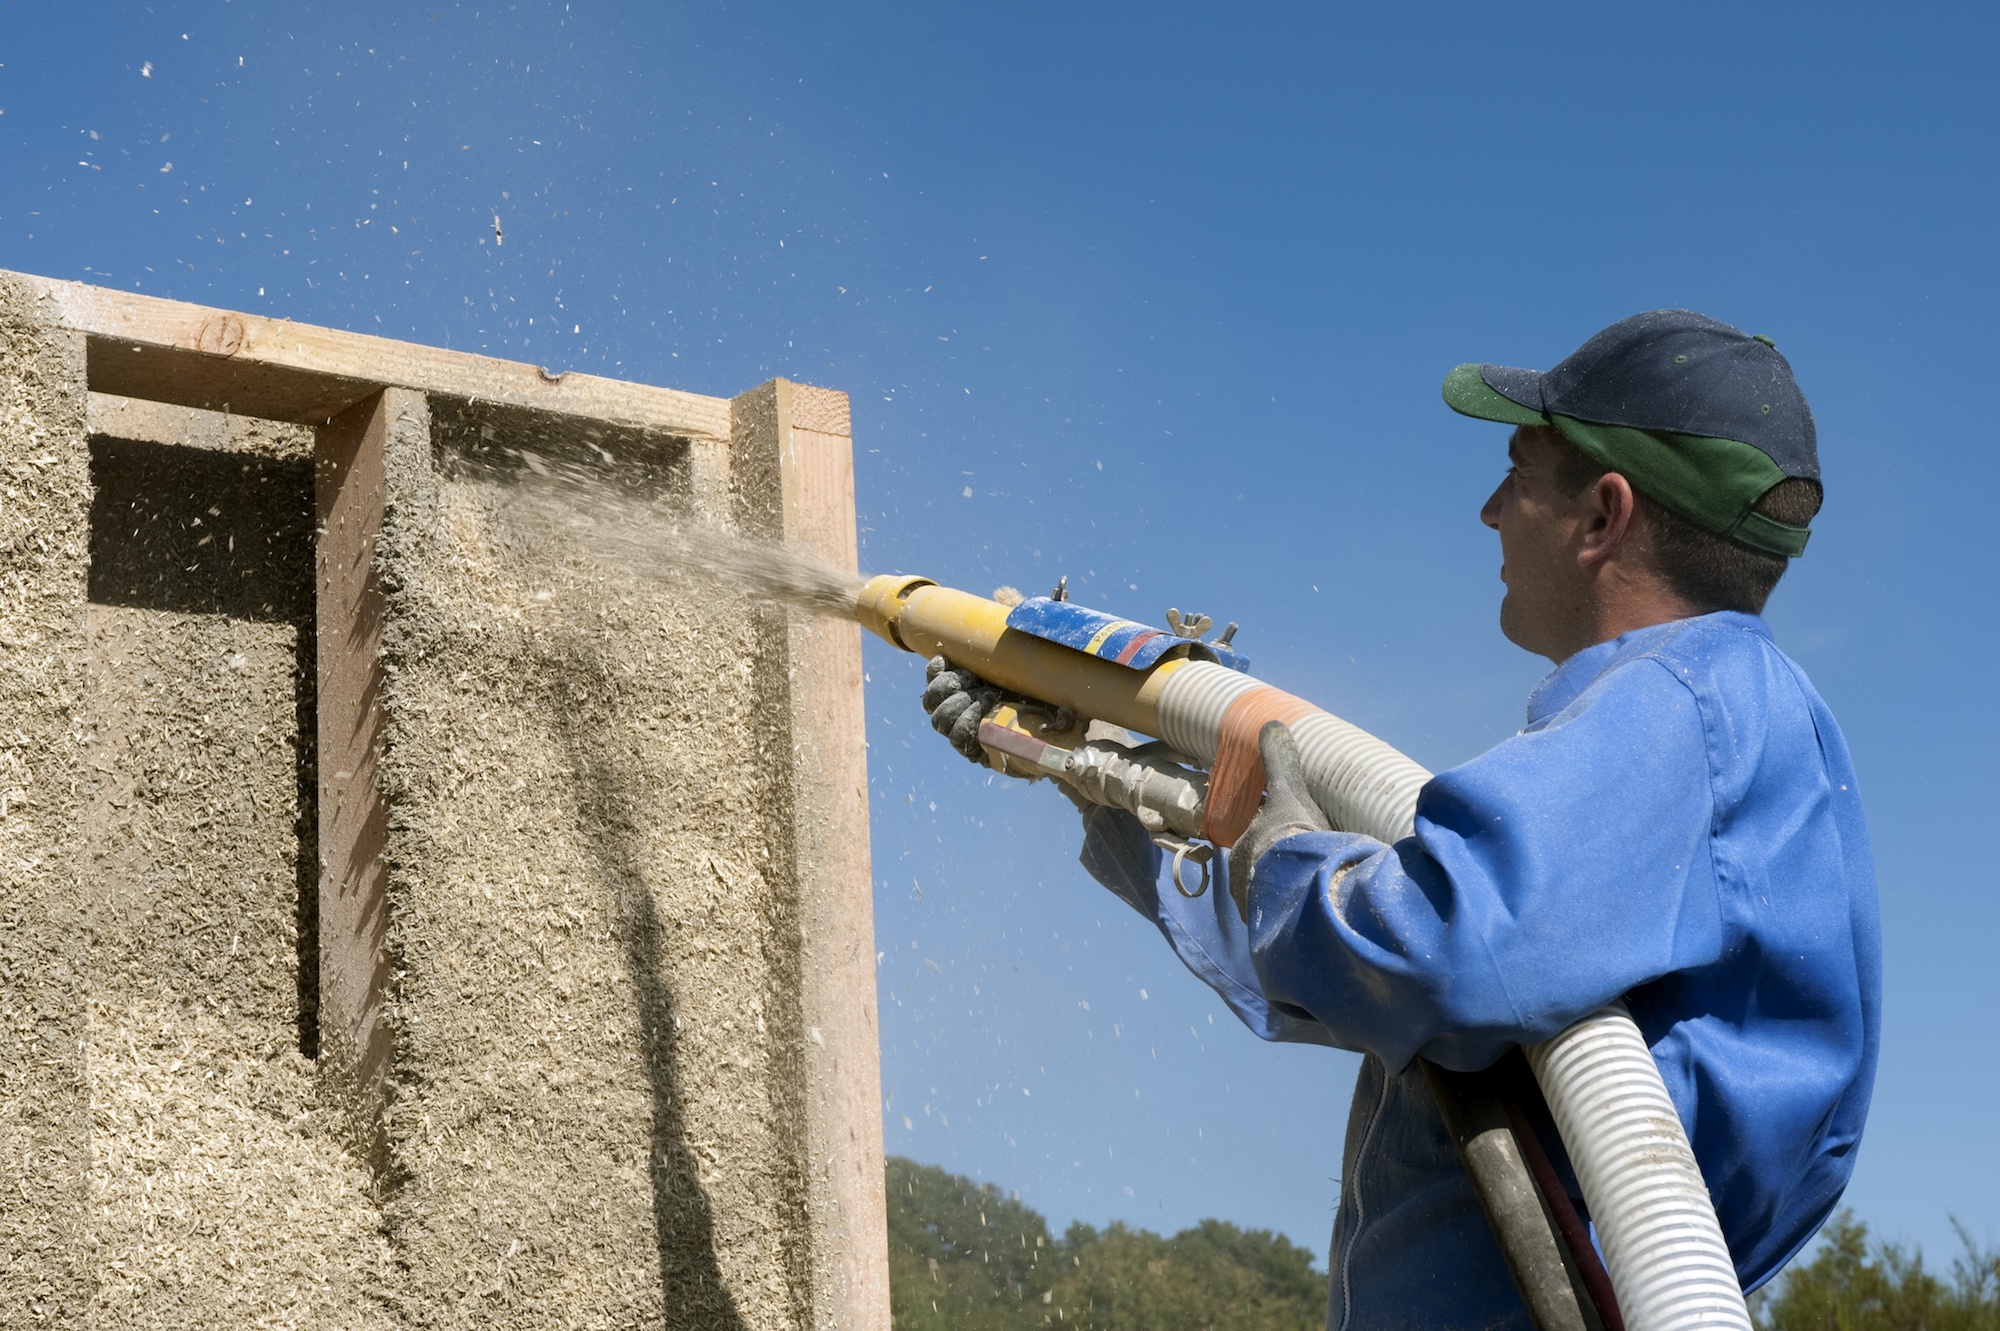 A man in a blue shirt and baseball cap holds a spray hose blasting out a mixture of small bits of hemp into a wooden building frame